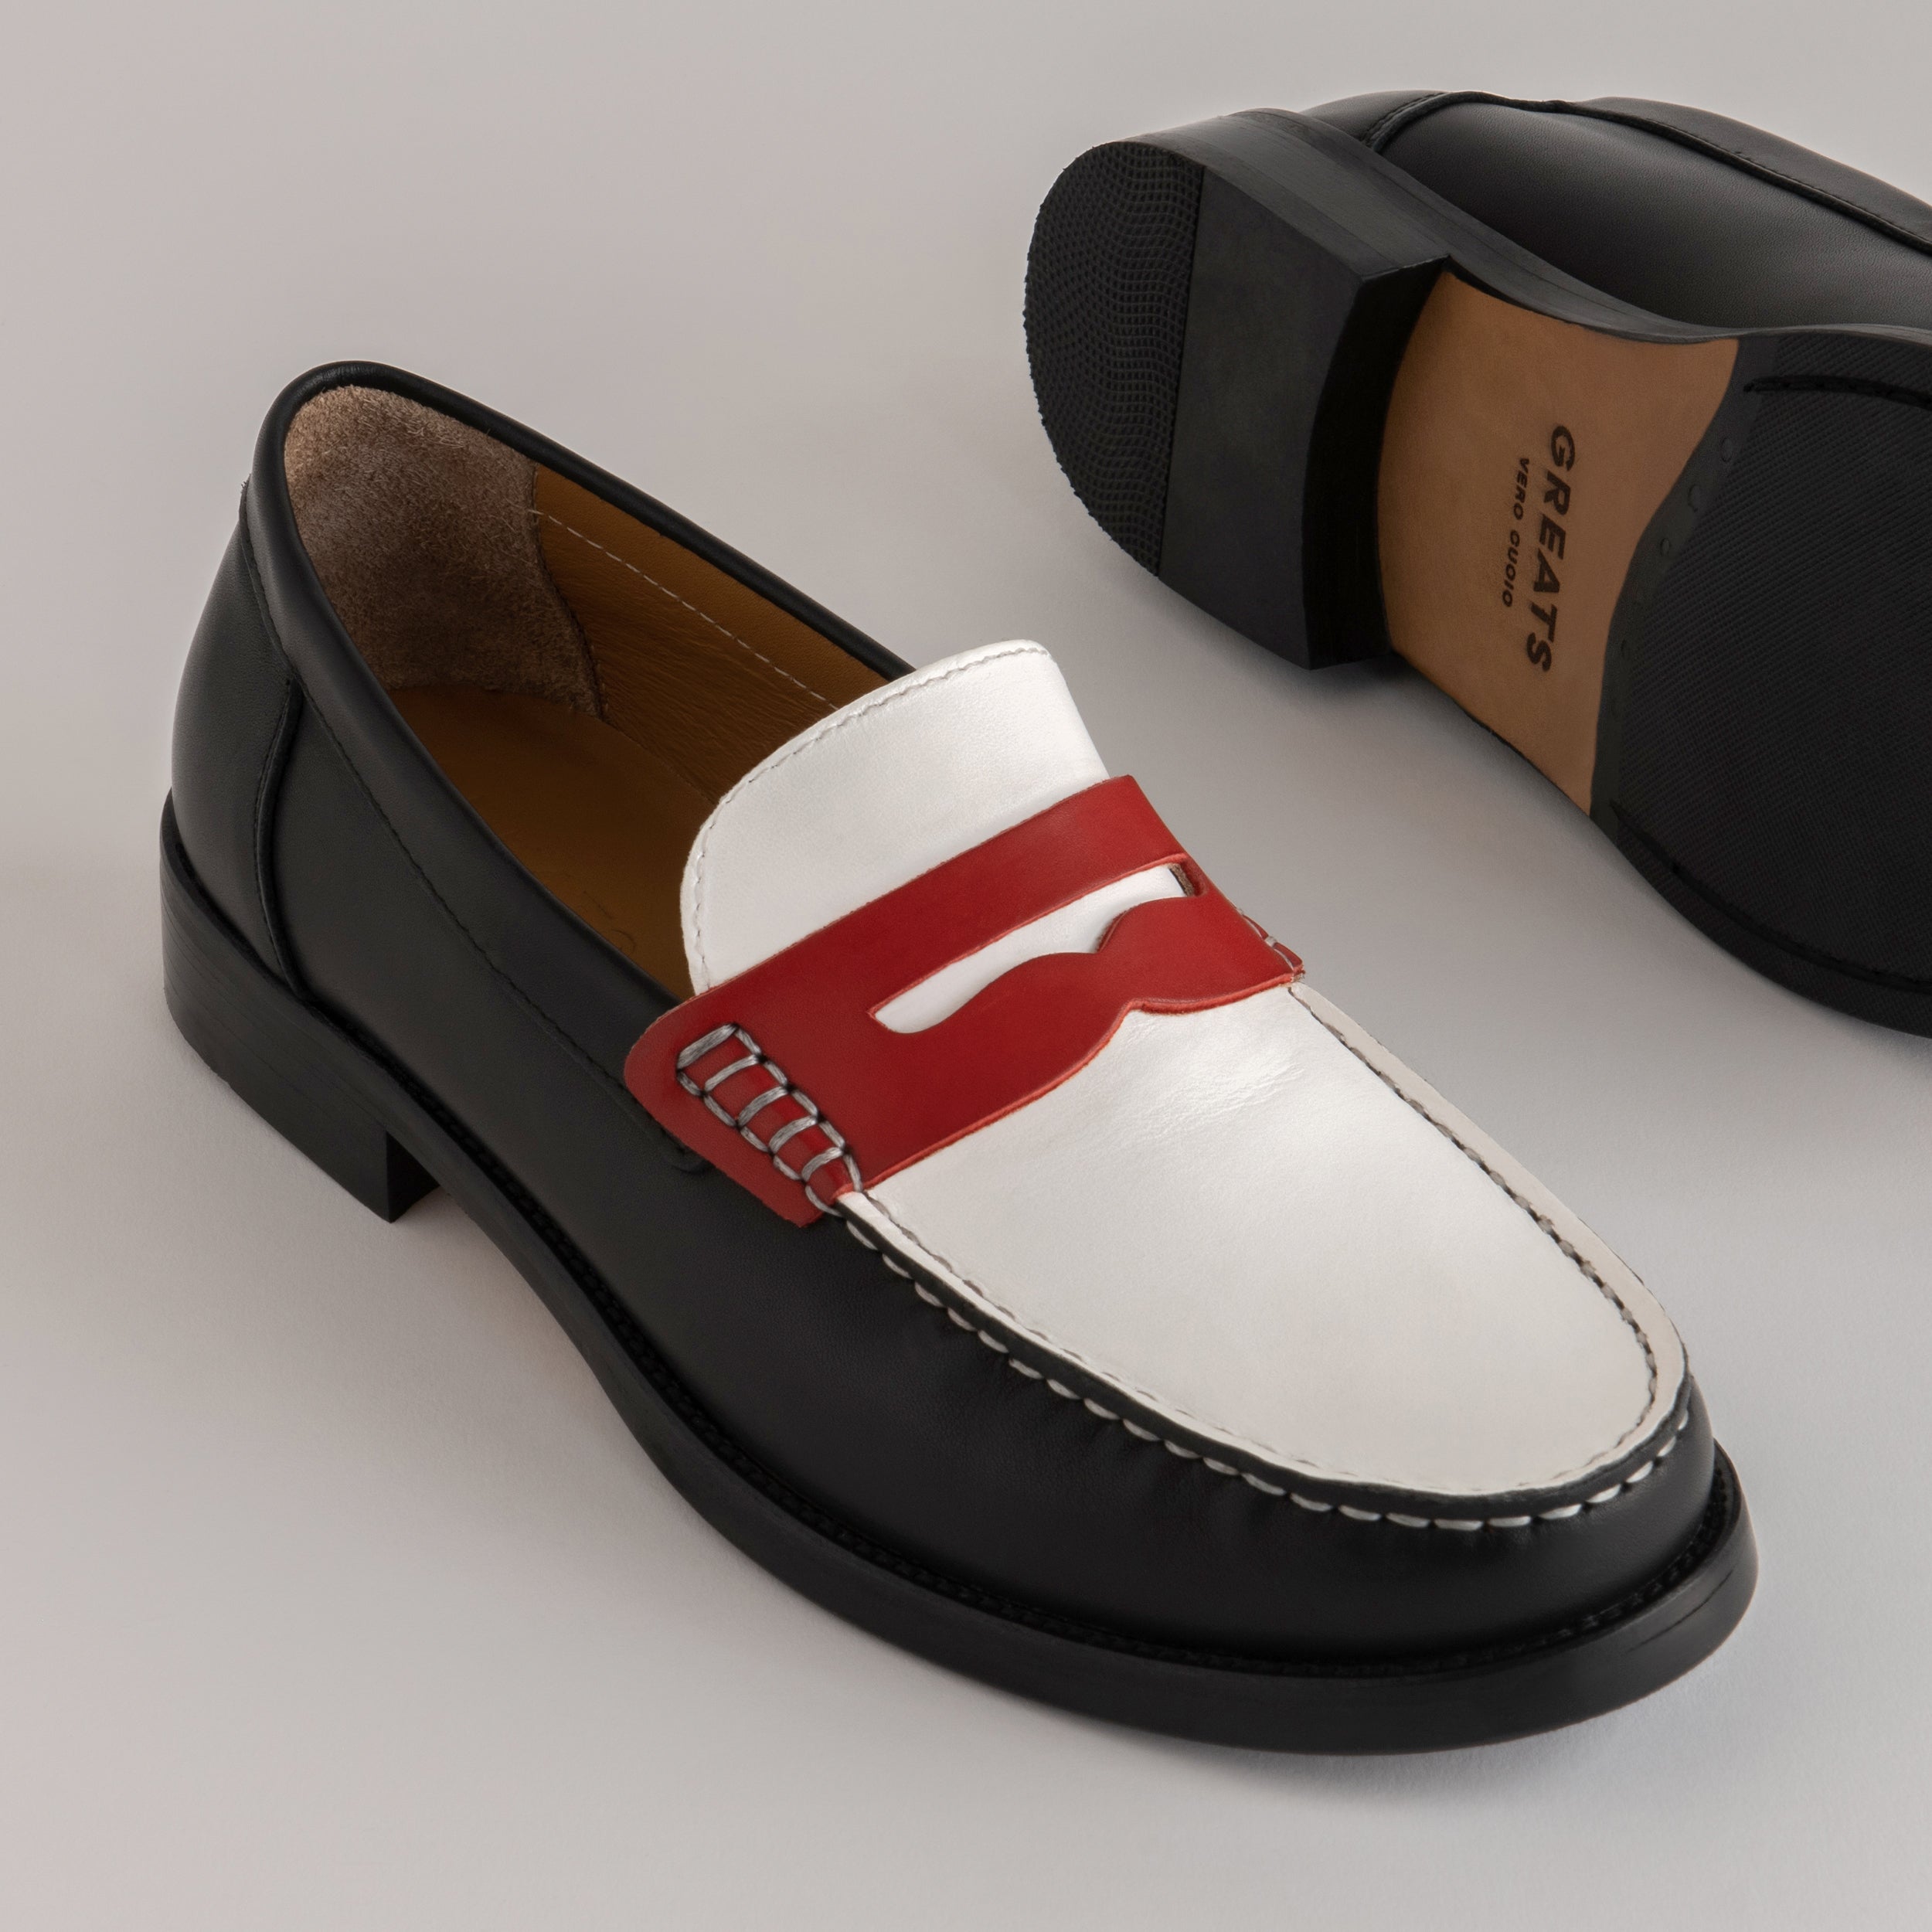 Men's Penny, Driving & Slip On Loafers